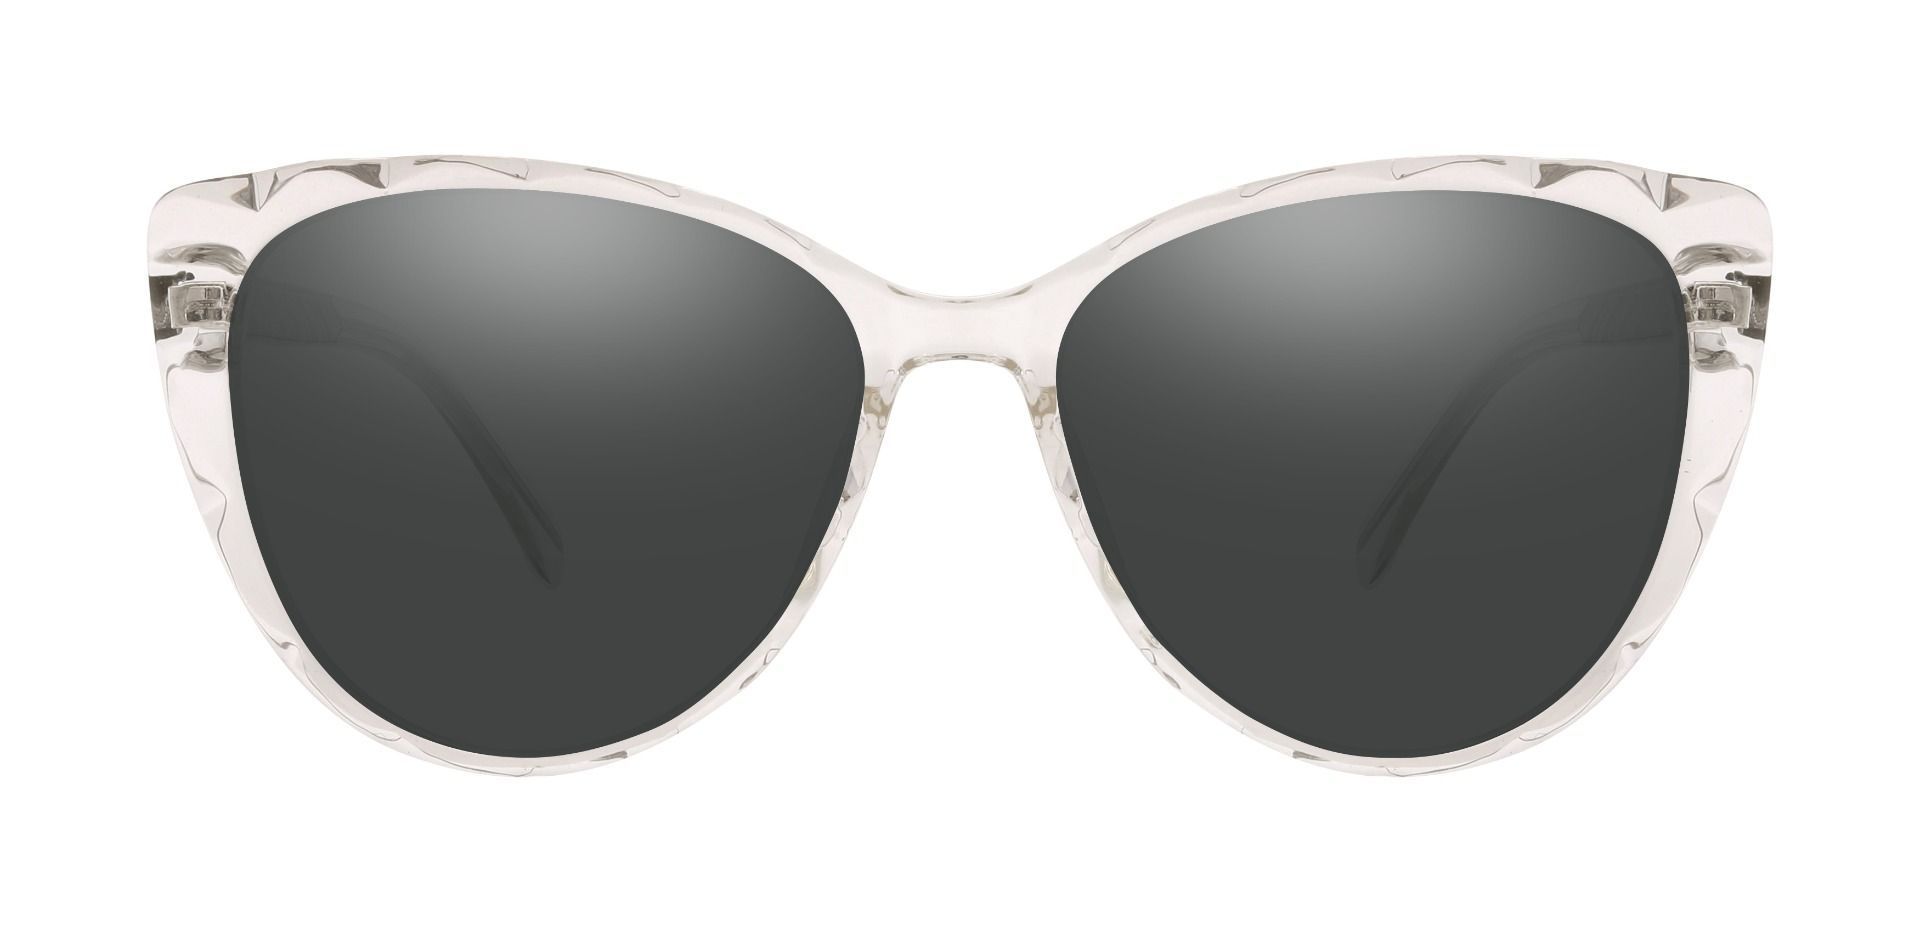 Fontaine Cat Eye Prescription Sunglasses - Clear Frame With Gray Lenses